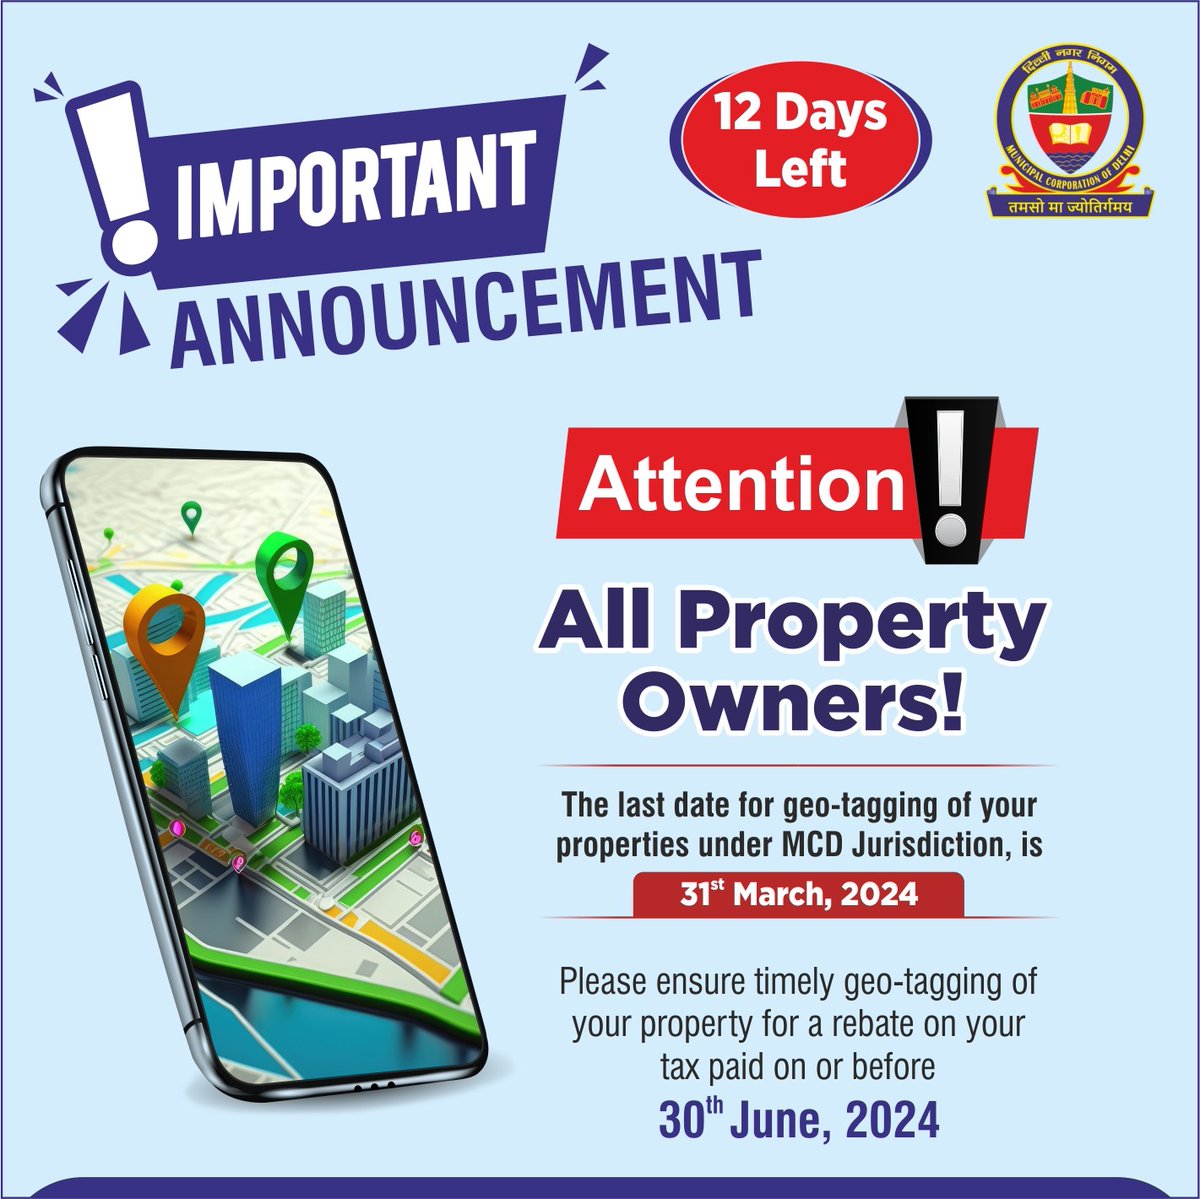 Dear Residents & Property Owners 📢 Have you completed the Geo-Tagging process for your property? It’s essential to avail 10% rebate on your property tax paid on or before 30th June. Hurry! Last date is 31st March, 2024 @LtGovDelhi @OberoiShelly @GyaneshBharti1